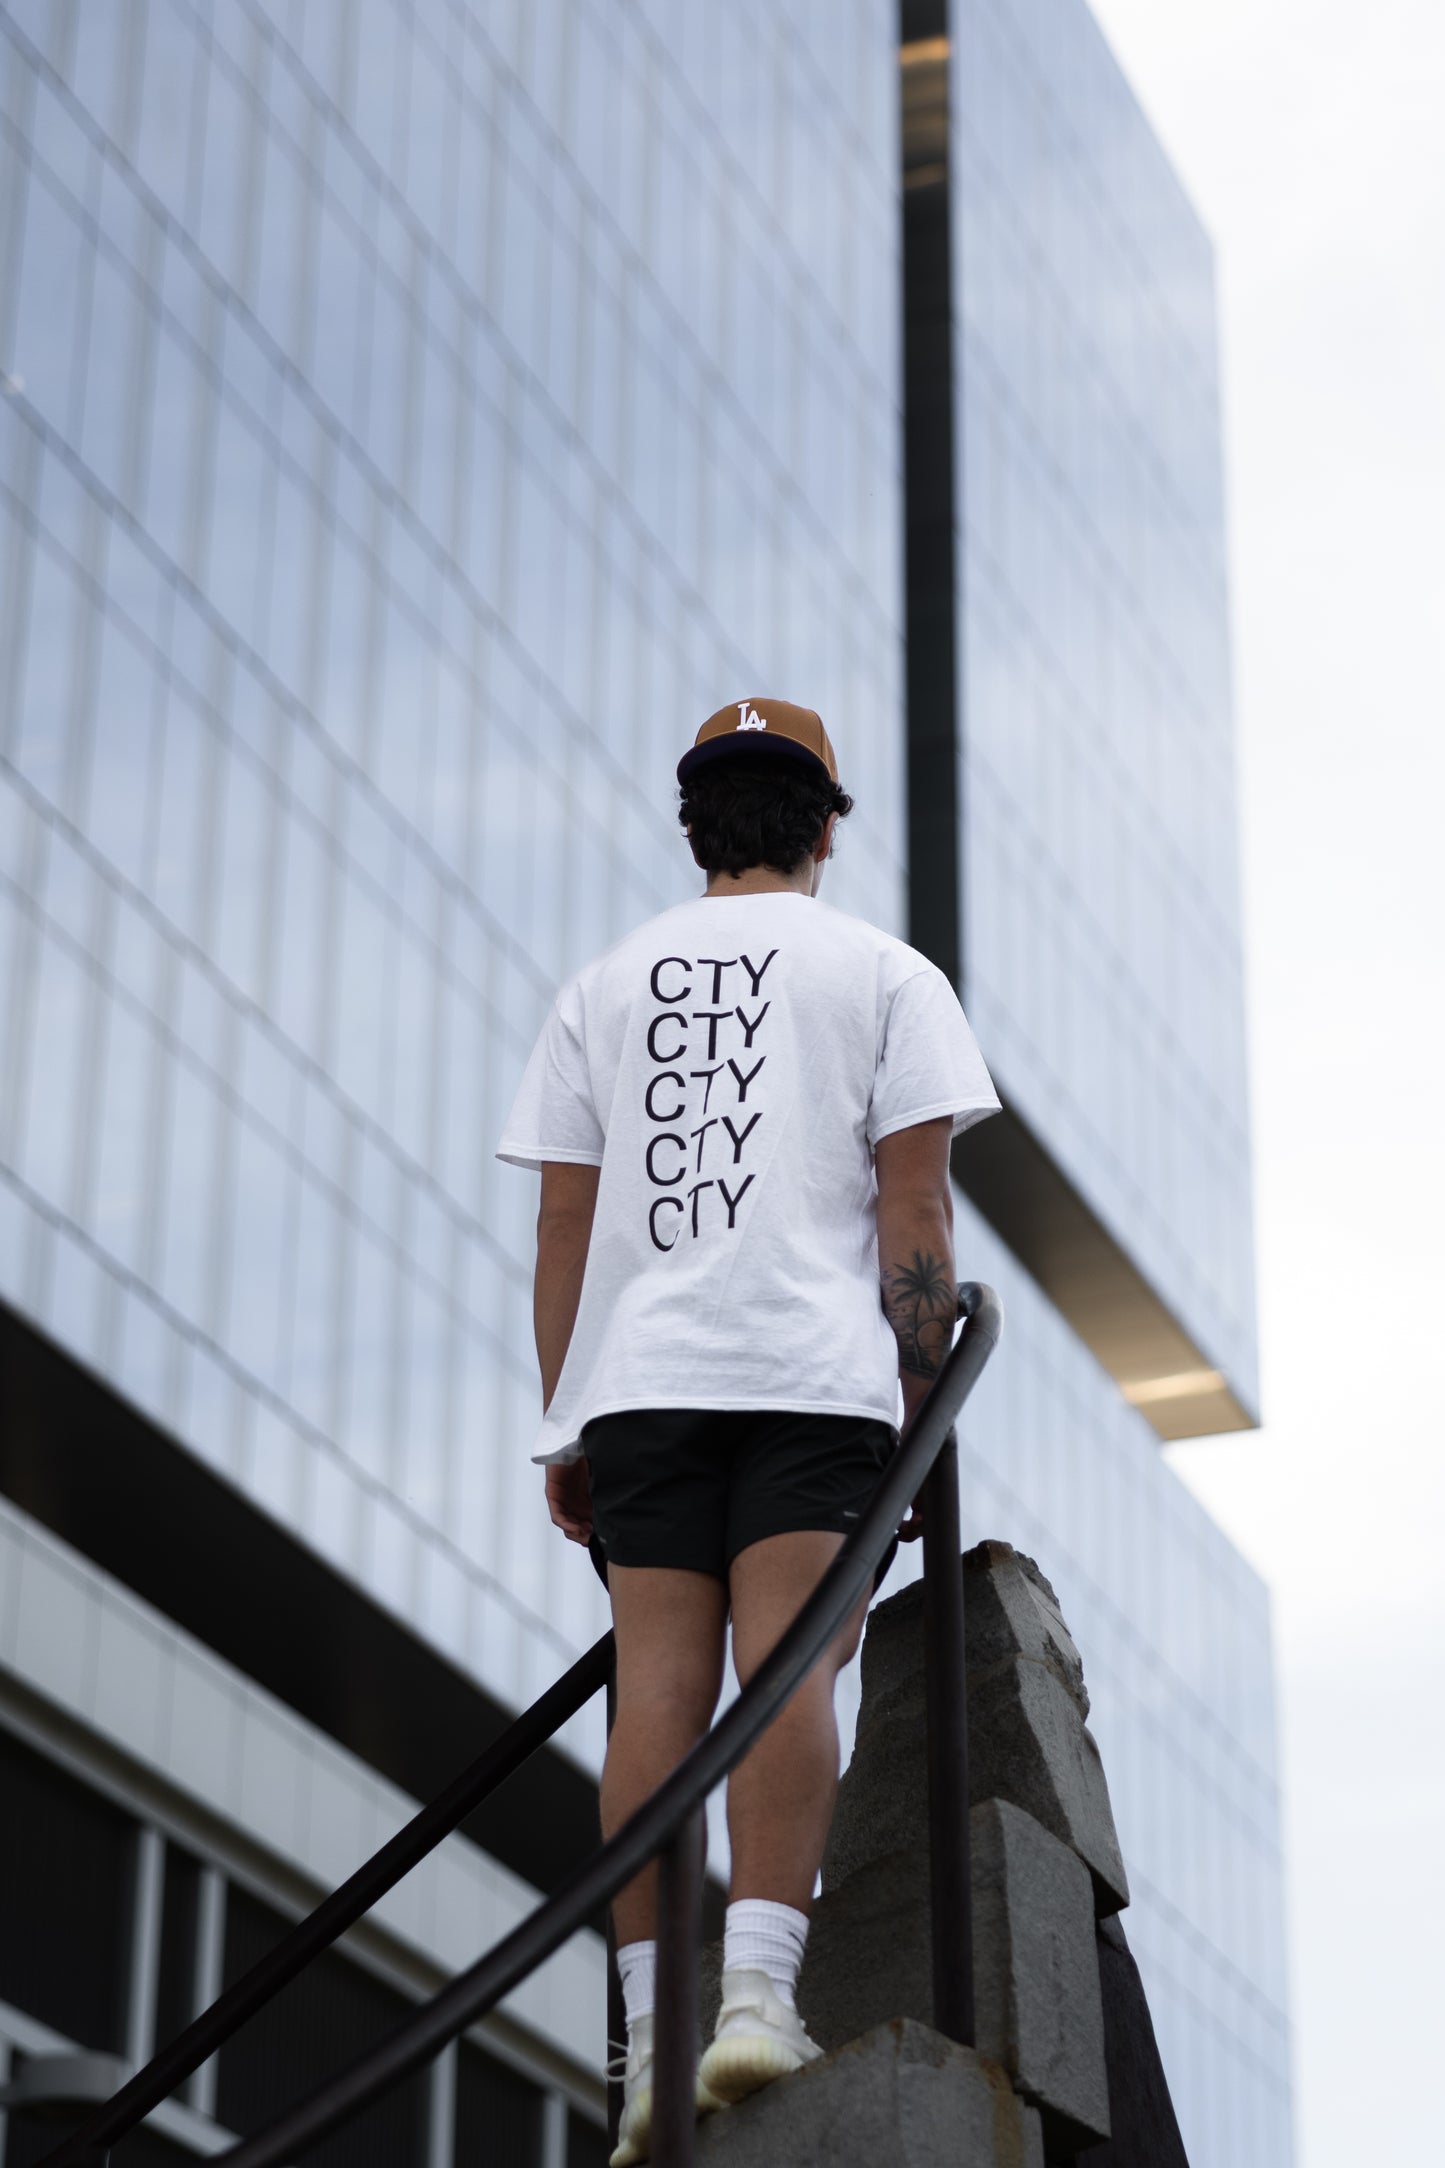 OFF-WHITE INSPIRED "CTY" Tee